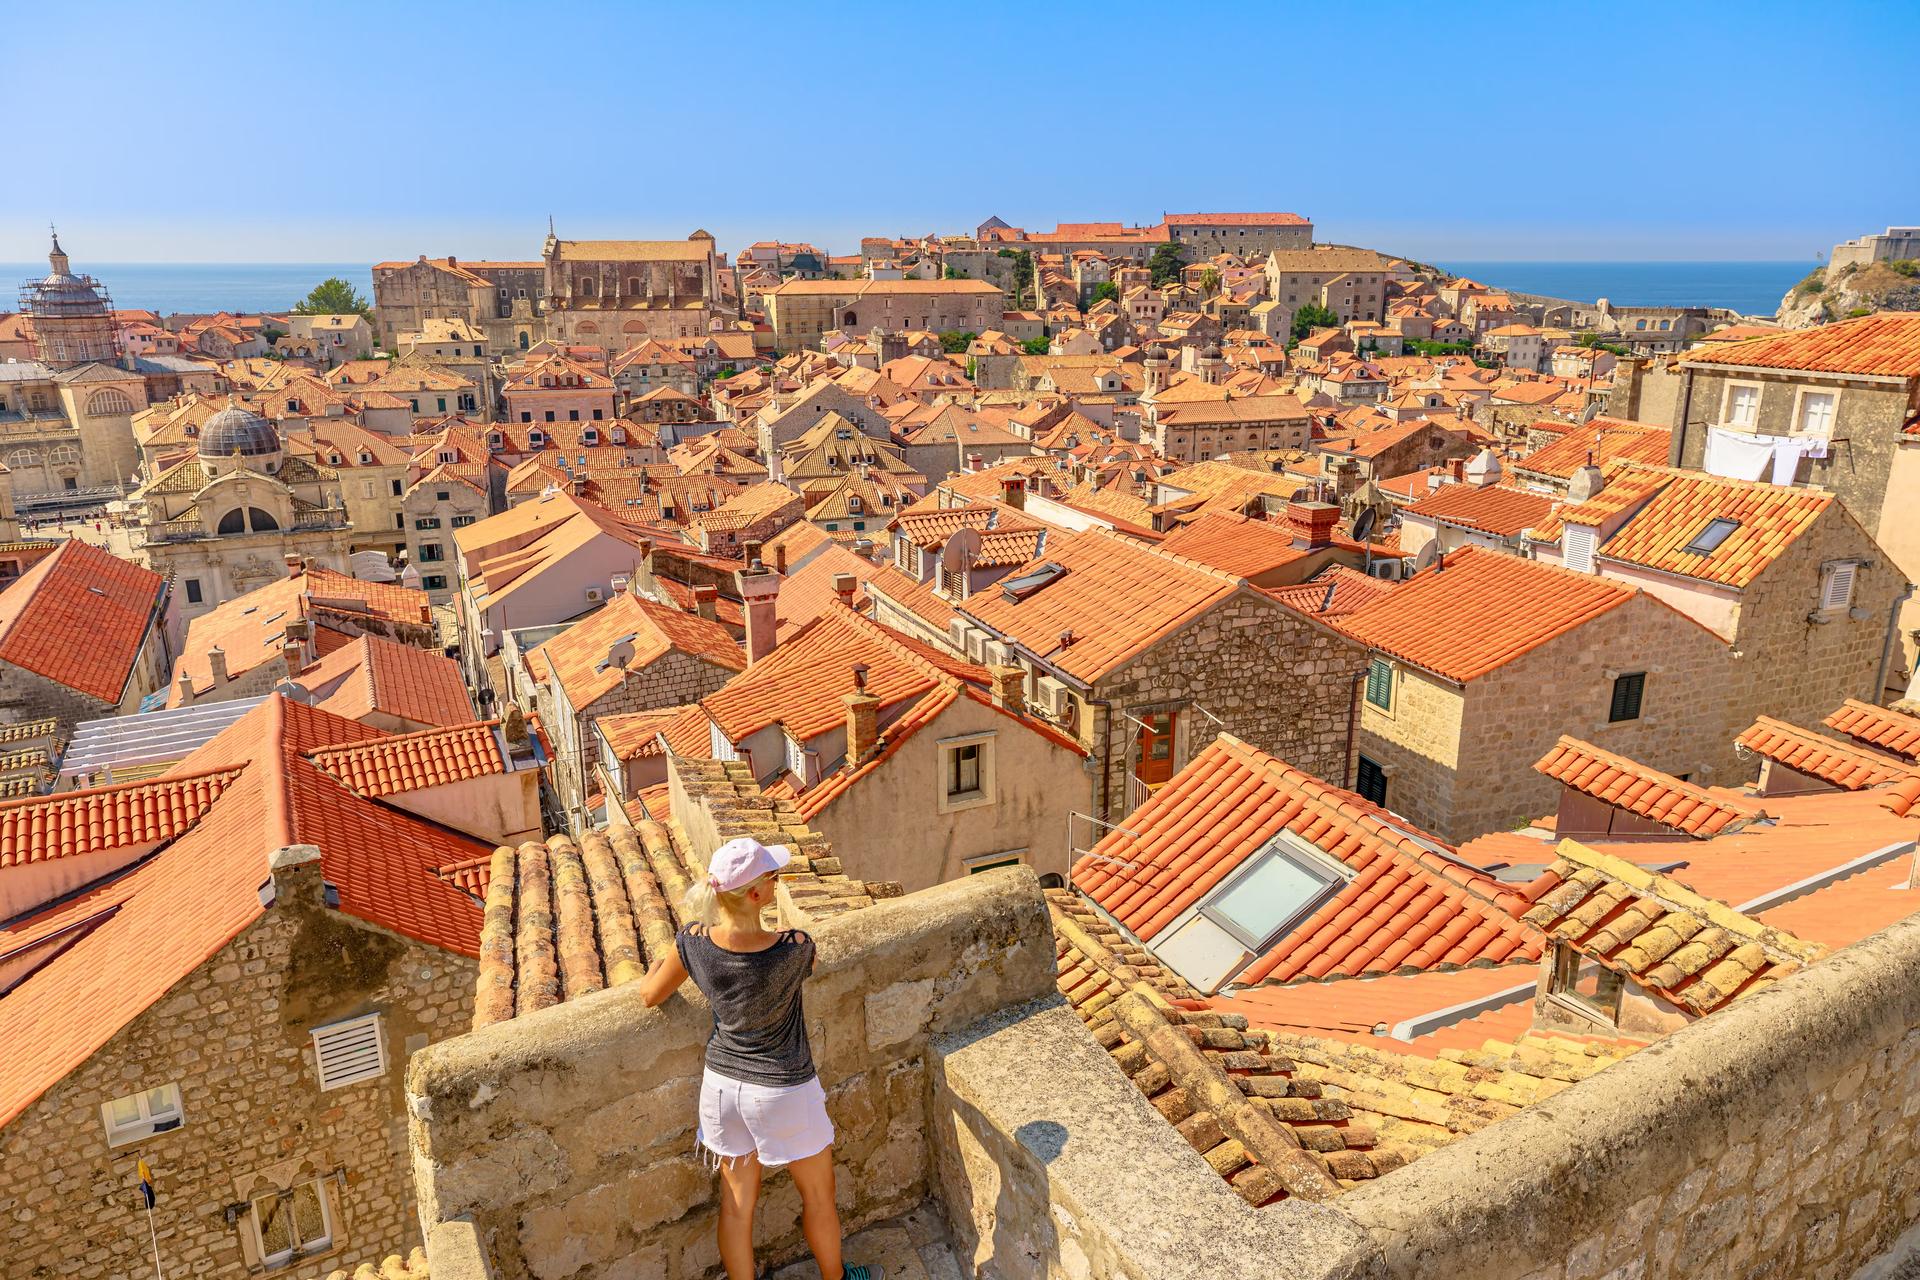 A woman stands at a viewpoint along the city walls in Dubrovnik looking out over the many red roofs in the Old Town